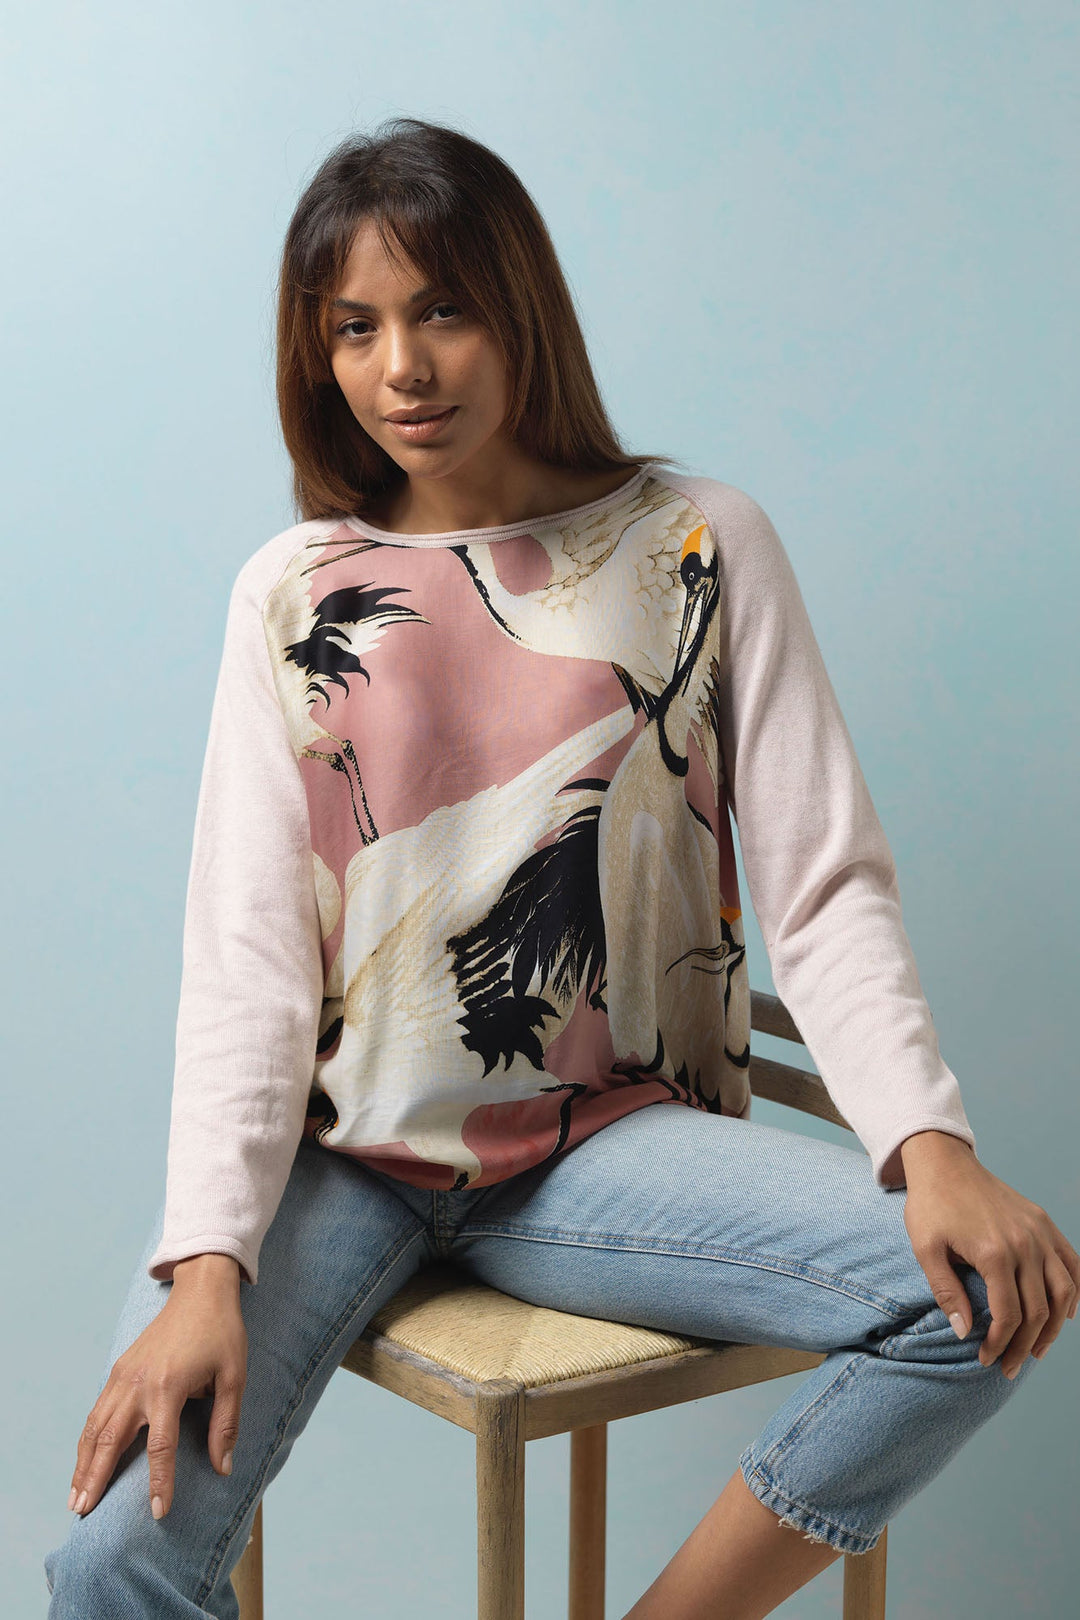 Our One Hundred Stars Stork Crane Pastel Pink Jumper is easy to wear this Spring Summer with blue jeans to brighten up your day.